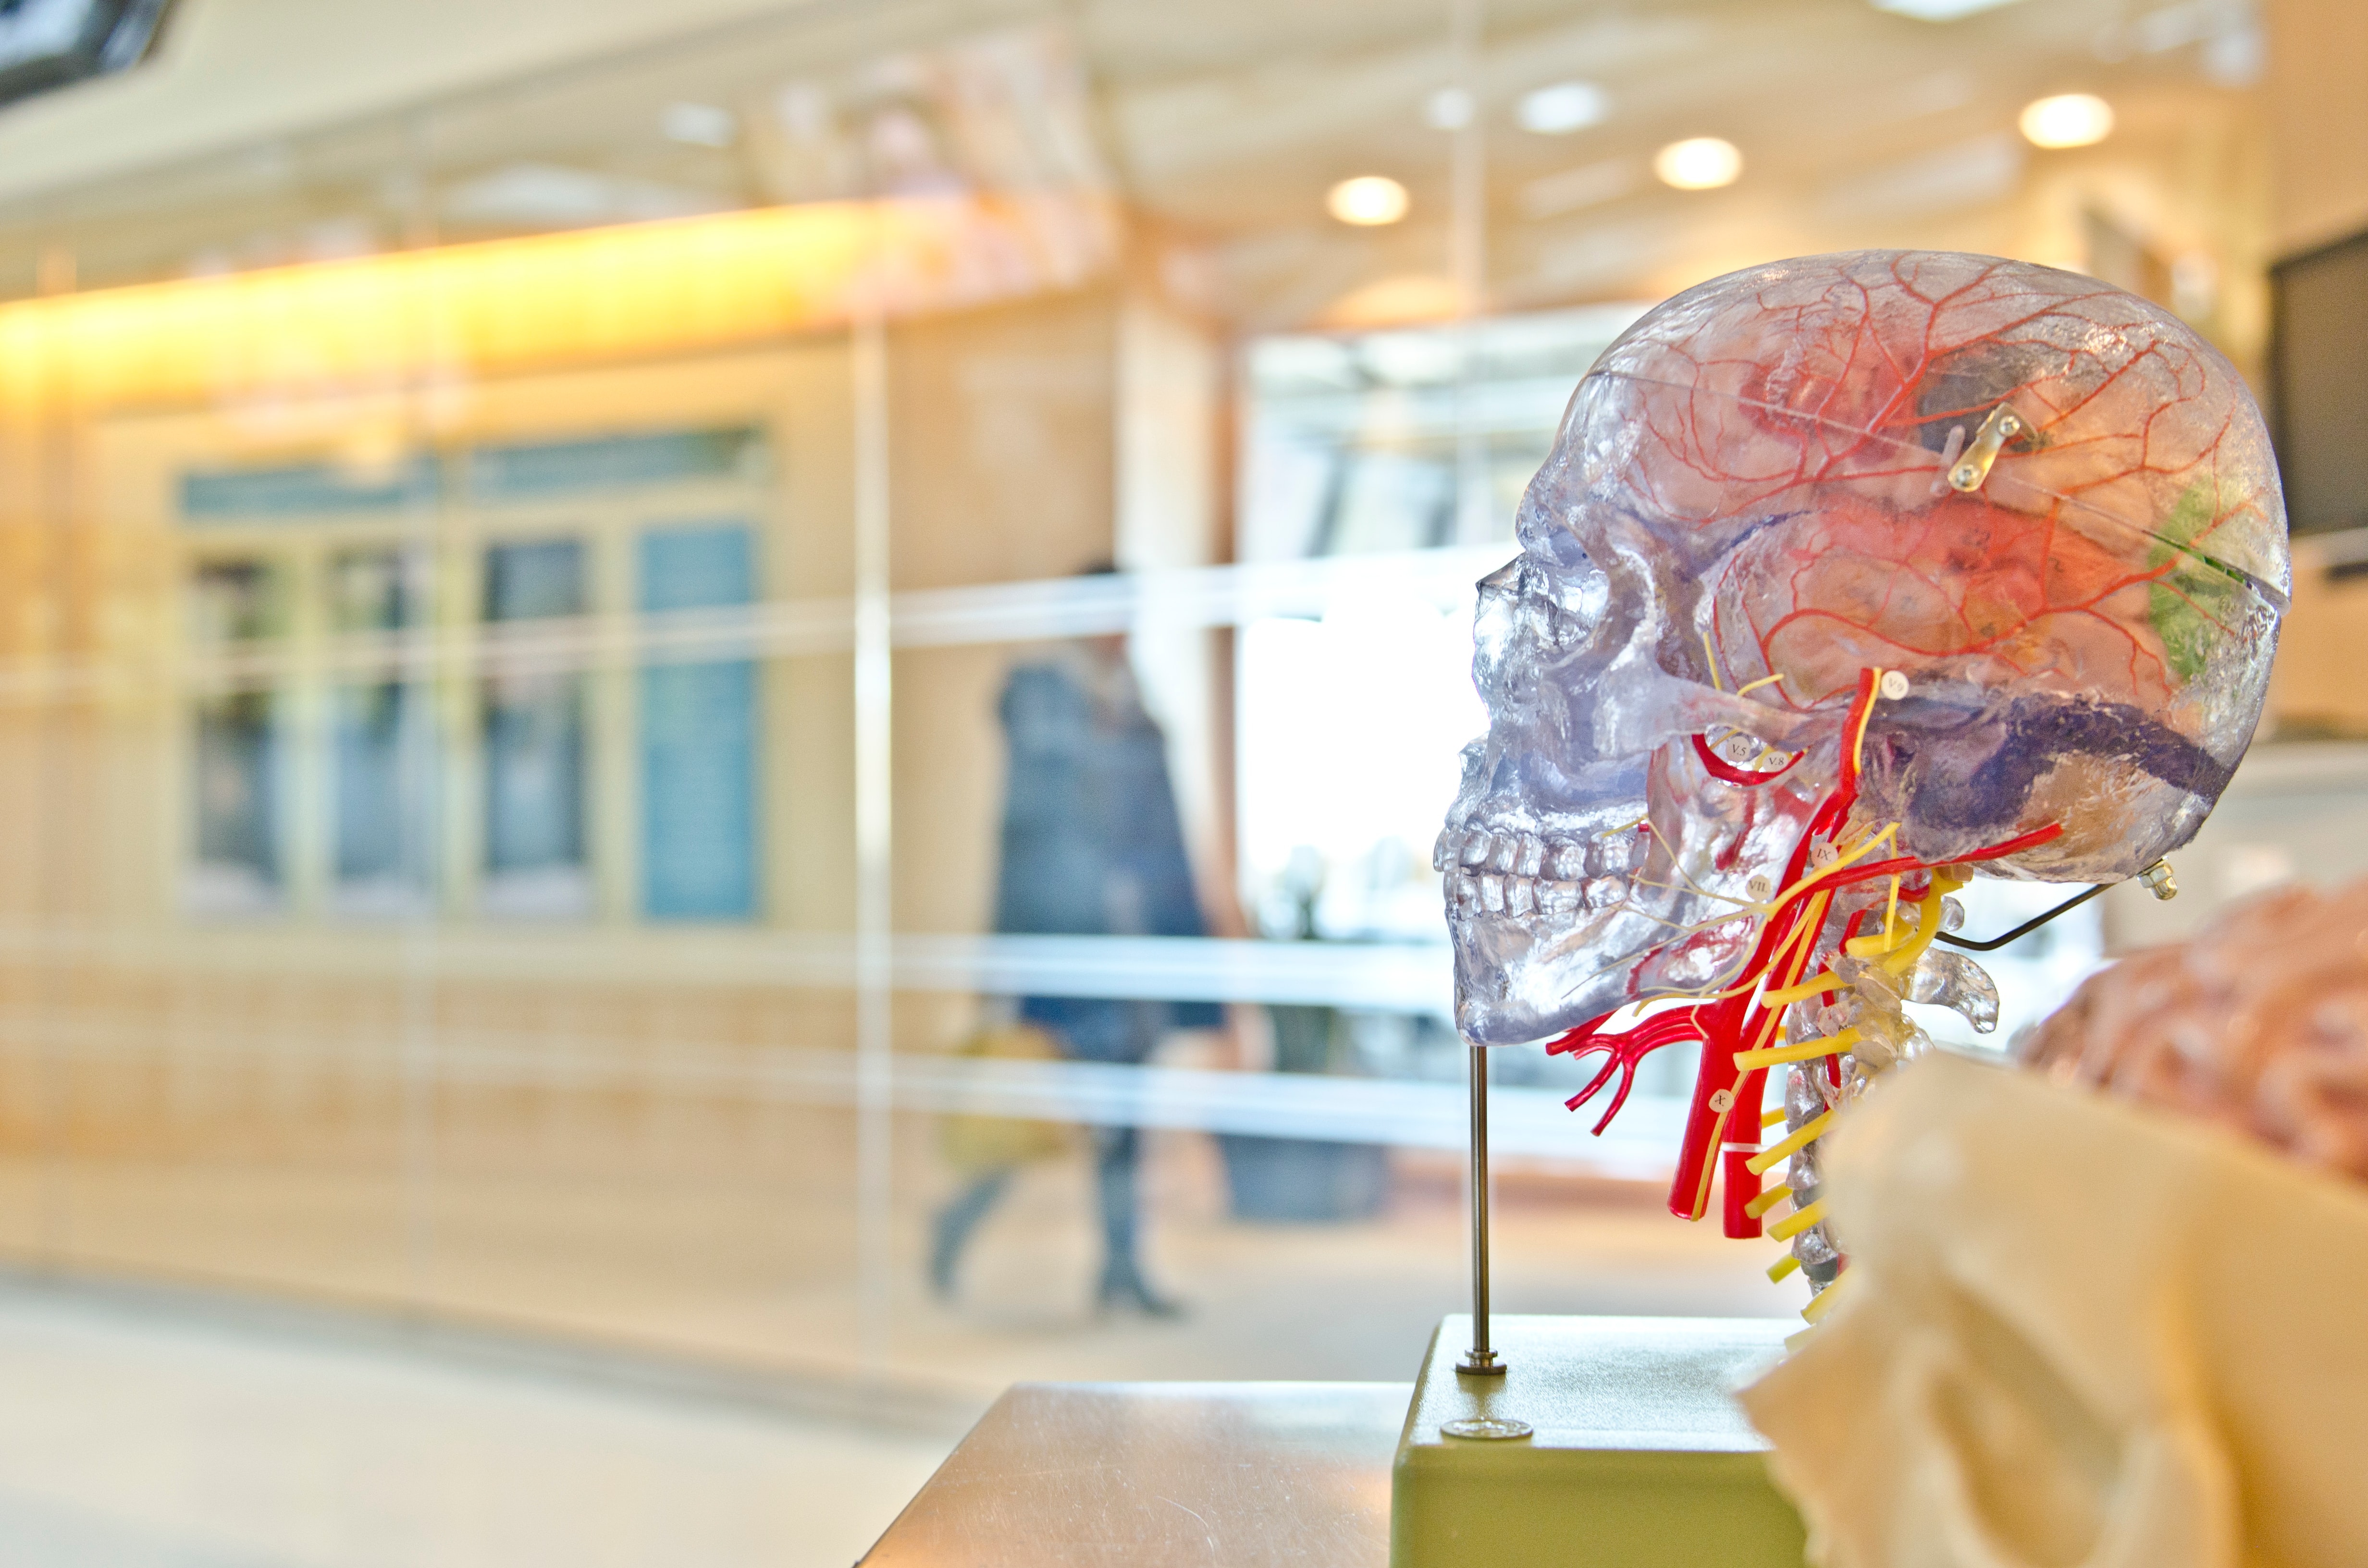 a science building with a model of the human brain and skull made of transparent plastic